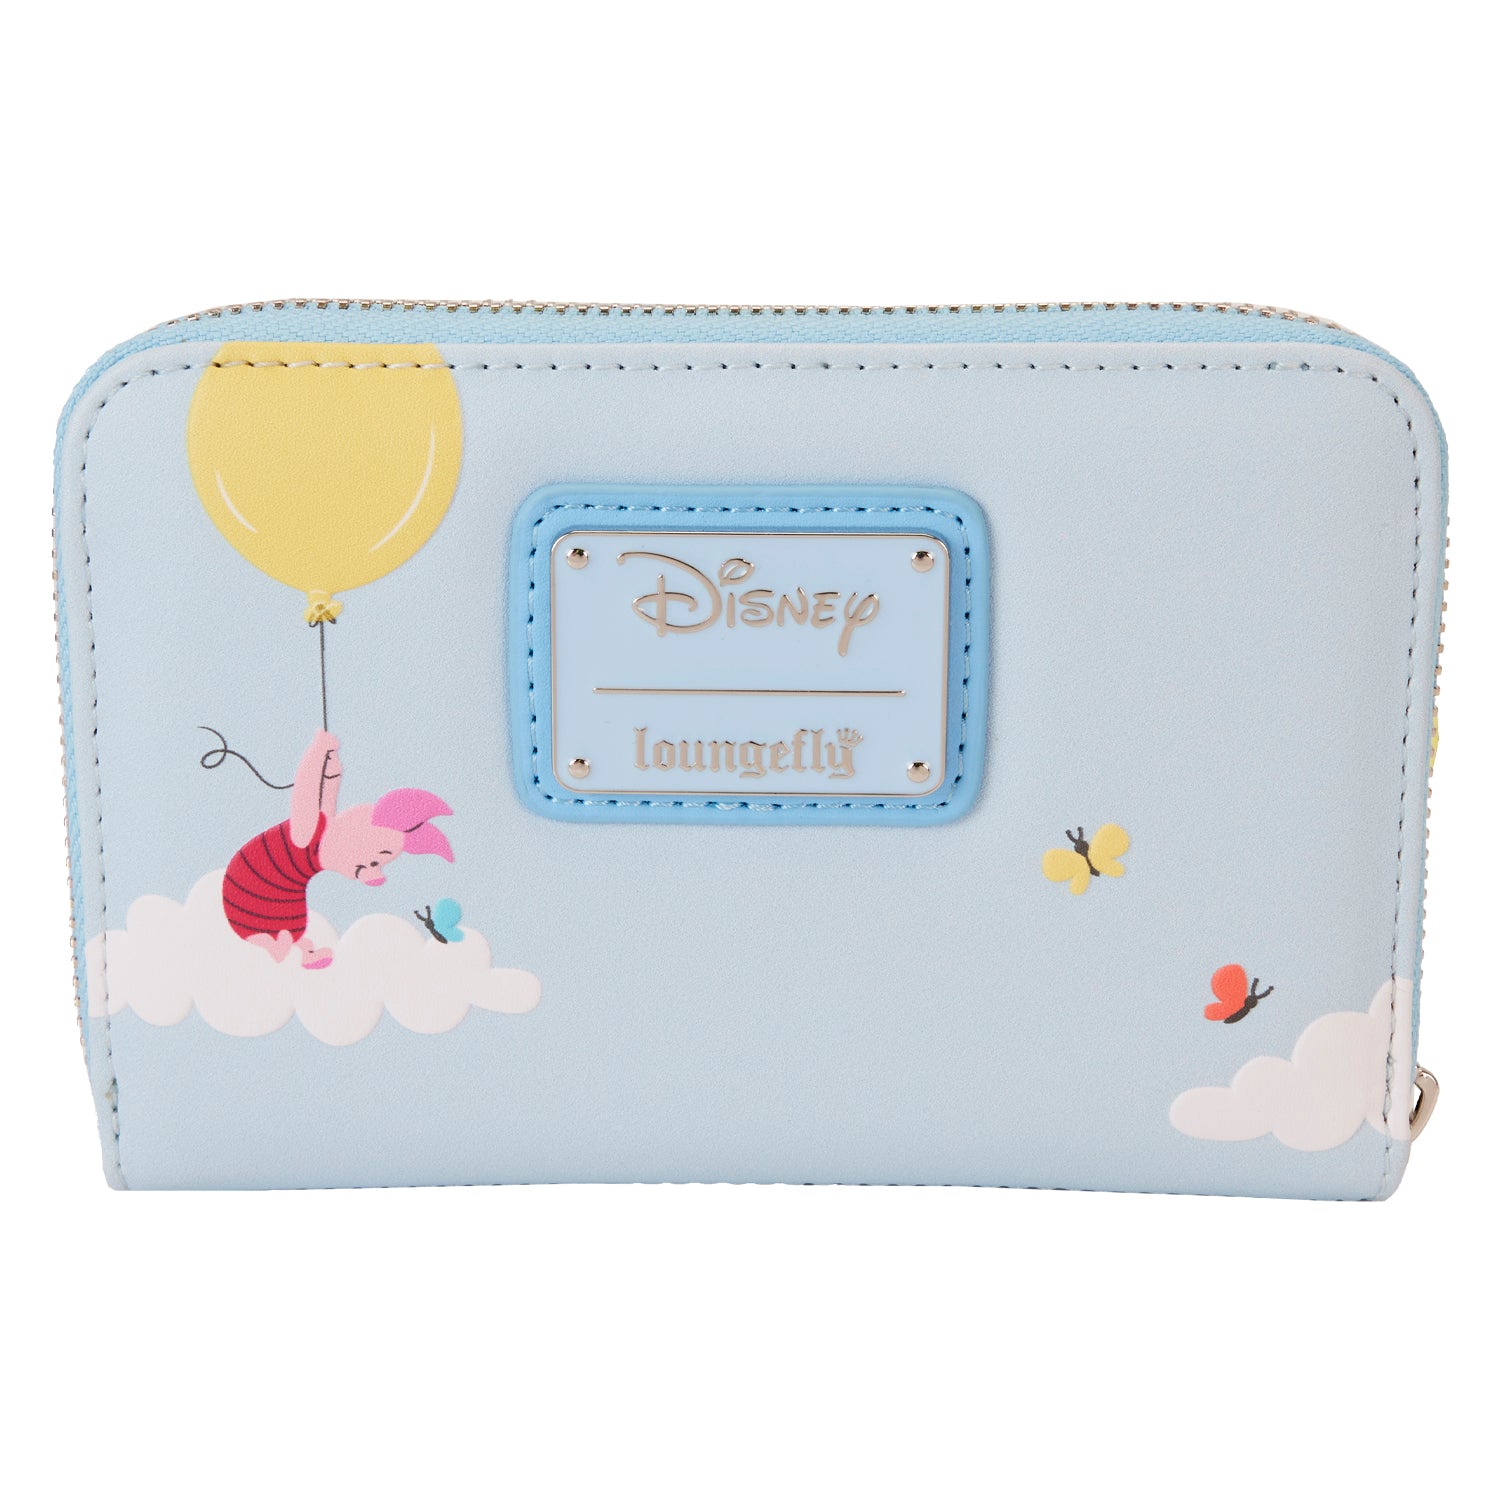 Loungefly x Disney Winnie the Pooh Balloons Wallet